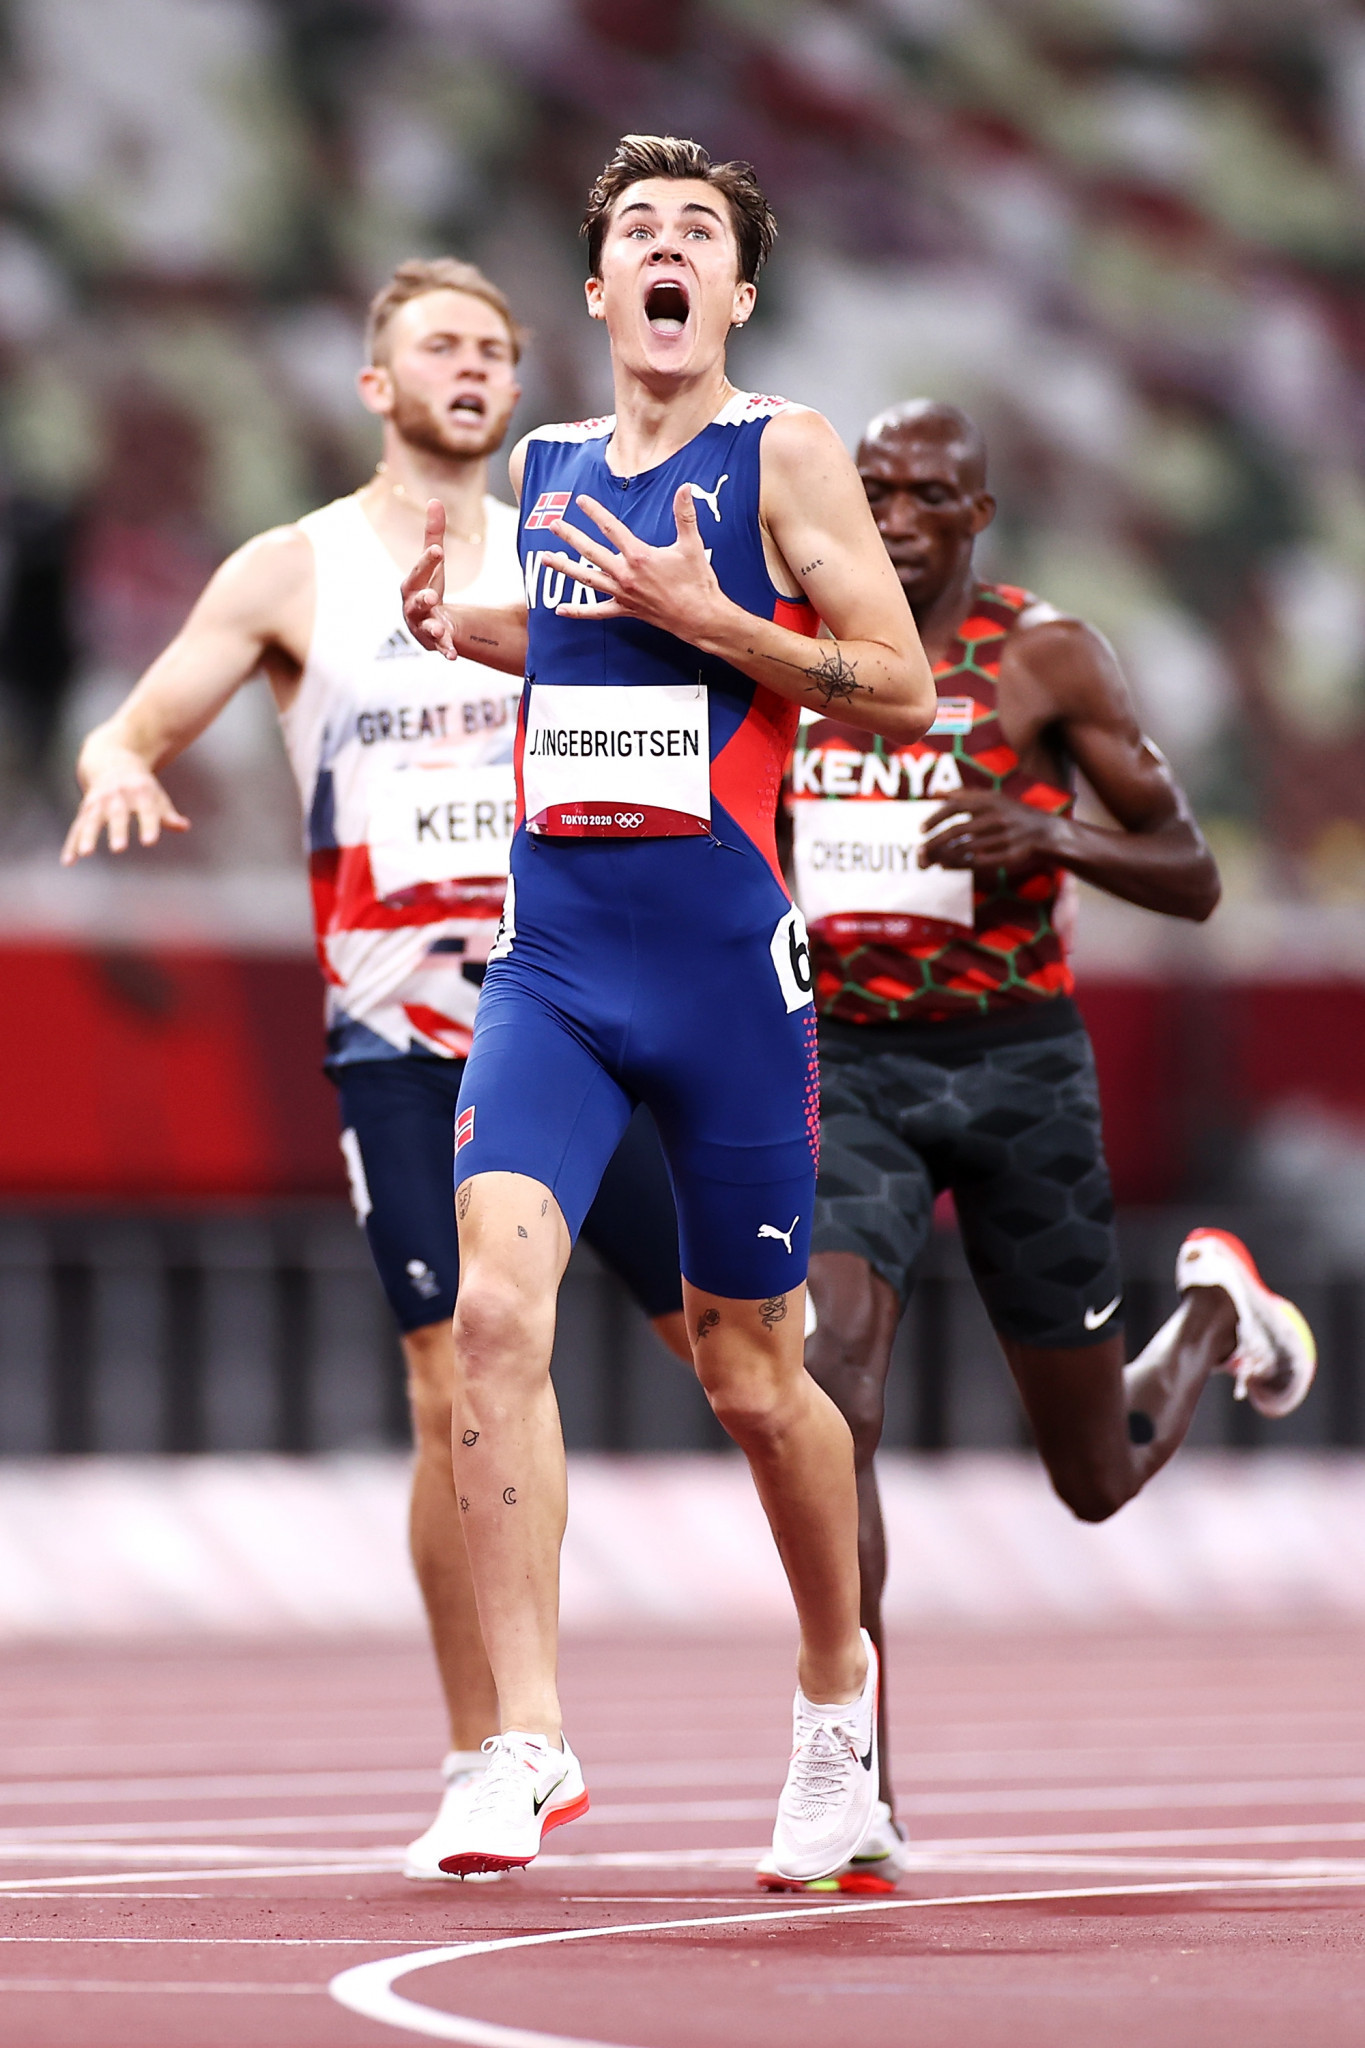 Norway's Jakob Ingebrigtsen won the 1500m at Tokyo 2020 and could chase a historic treble at Paris 2024 ©Getty Images